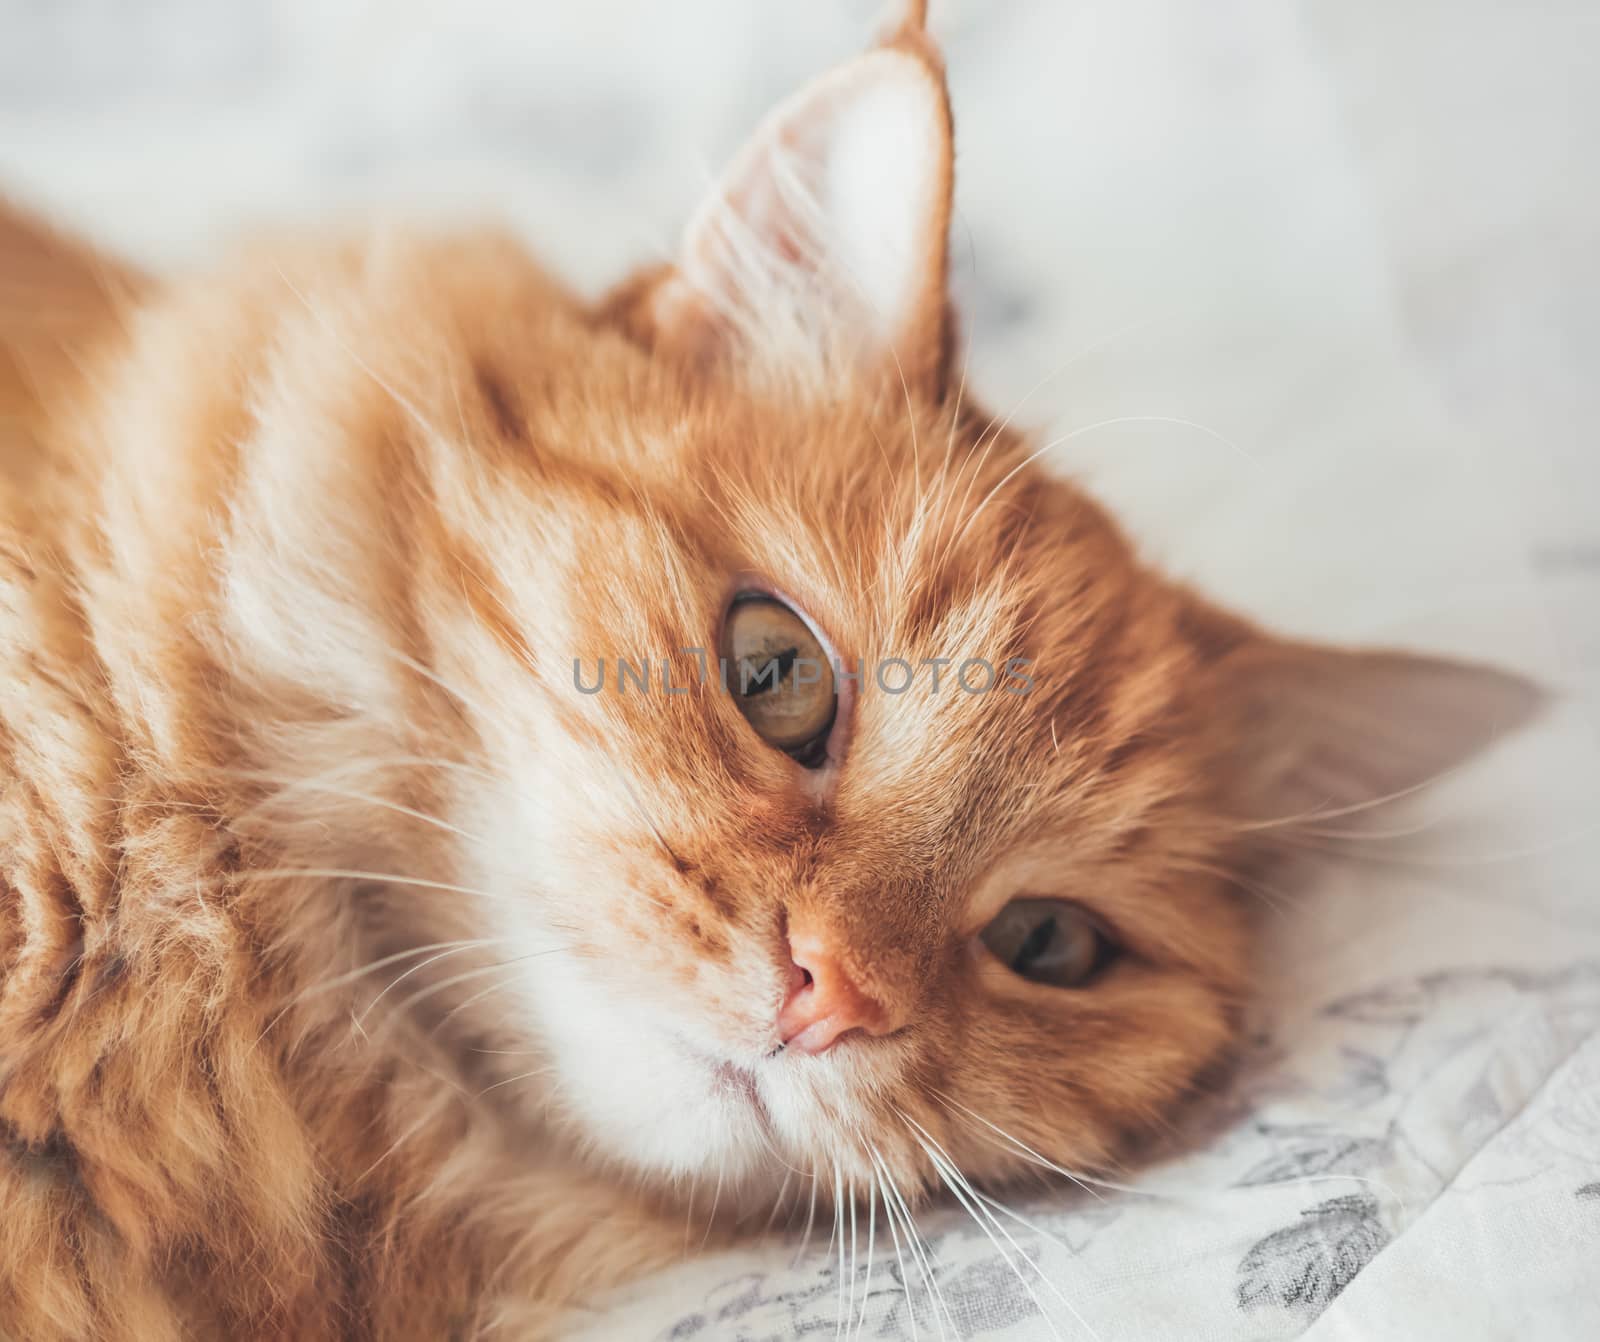 Close up portrait of cute ginger cat lying on bed. Curious and funny pet. Fuzzy domestic animal.